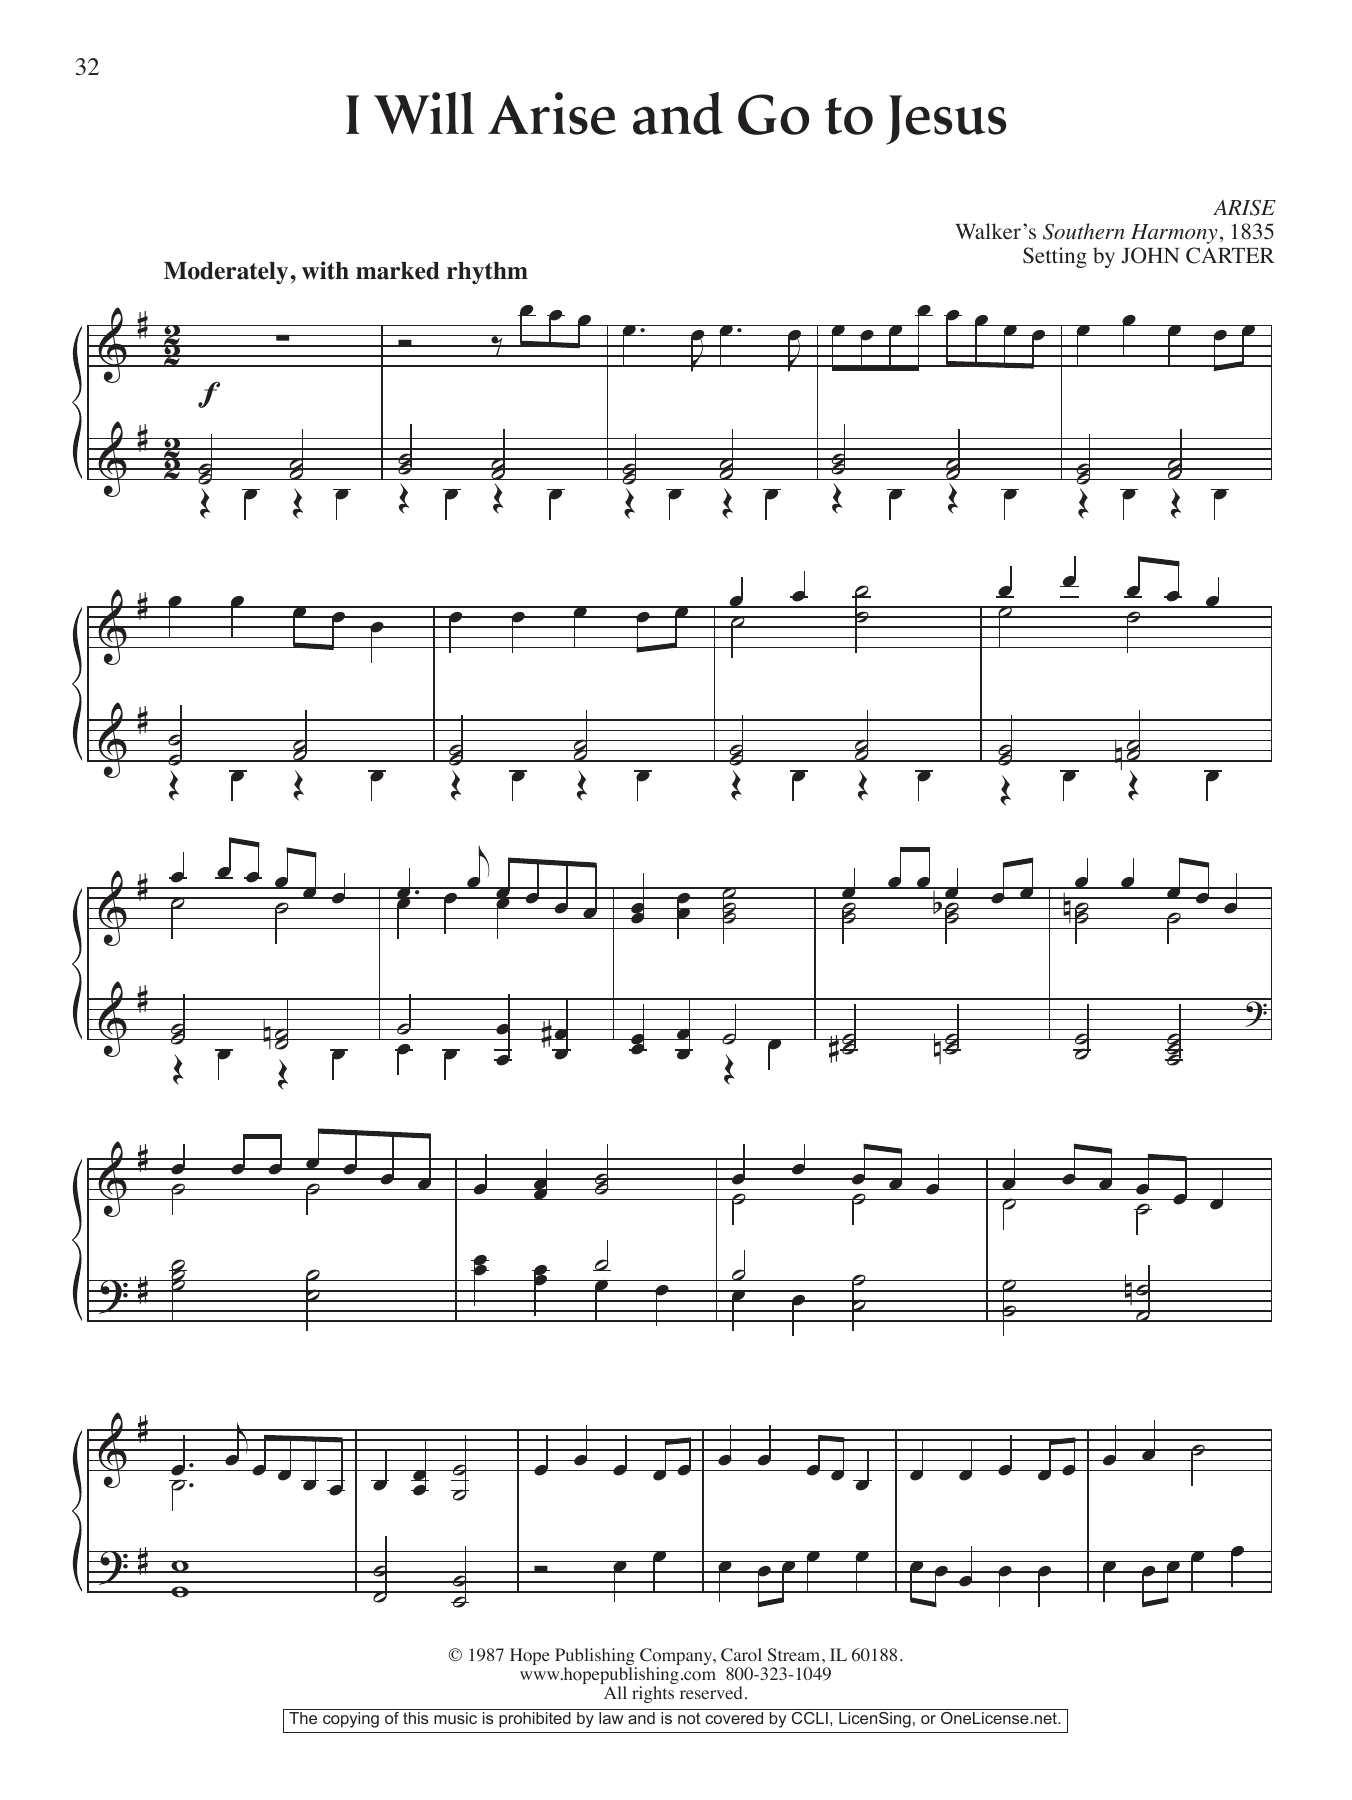 Download John Carter I Will Arise and Go to Jesus Sheet Music